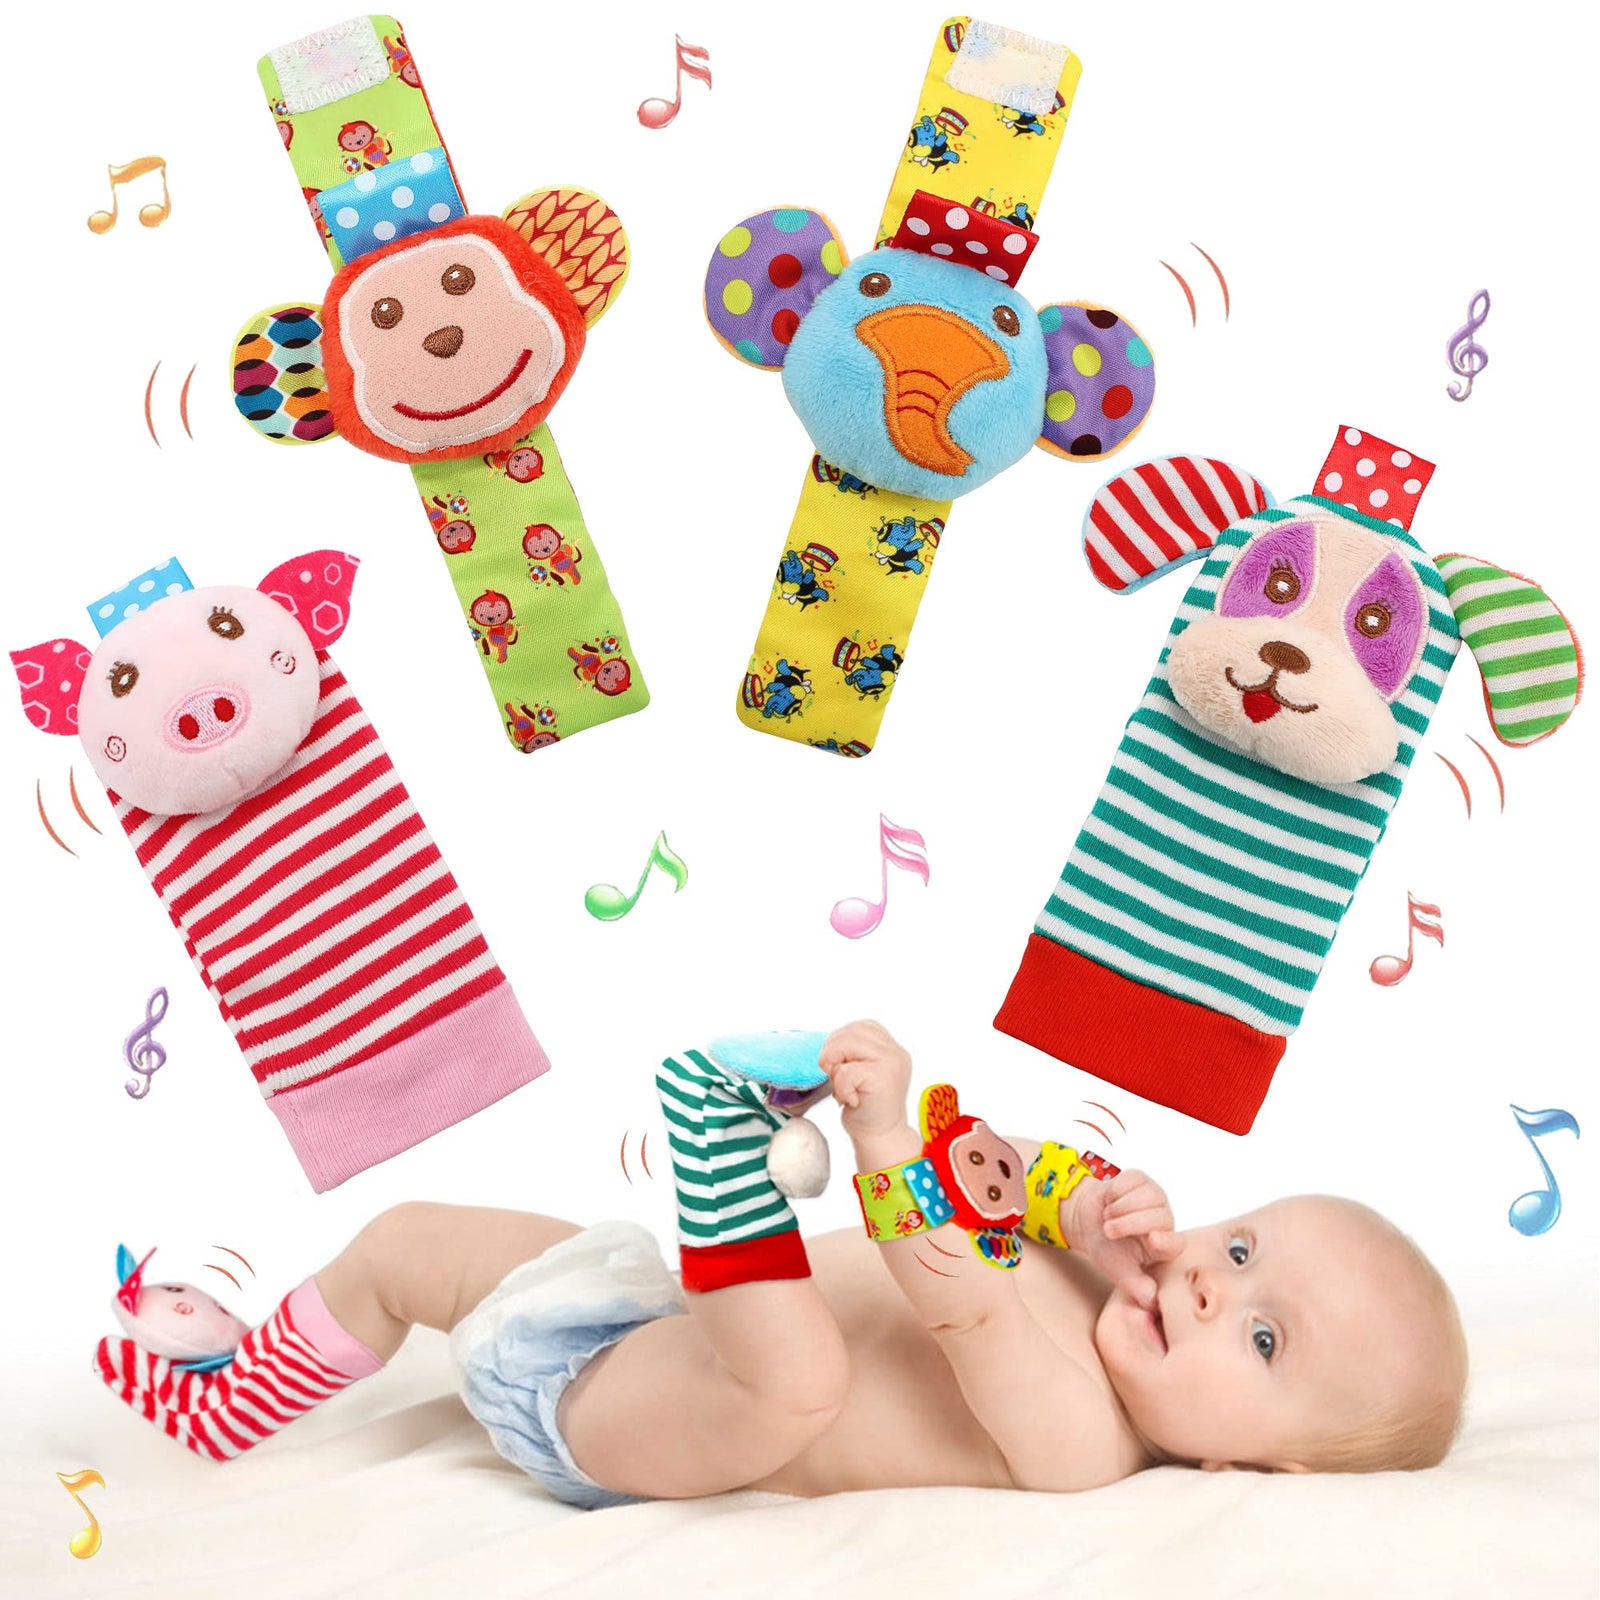 SSK Soft Baby Wrist Rattle Foot Finder Socks Set,Cotton and Plush Stuffed Infant Toys,Birthday Holiday Birth Present for Newborn Boy Girl 0/3/4/6/7/8/9/12/18 Months Kids Toddler,4 Cute Animals